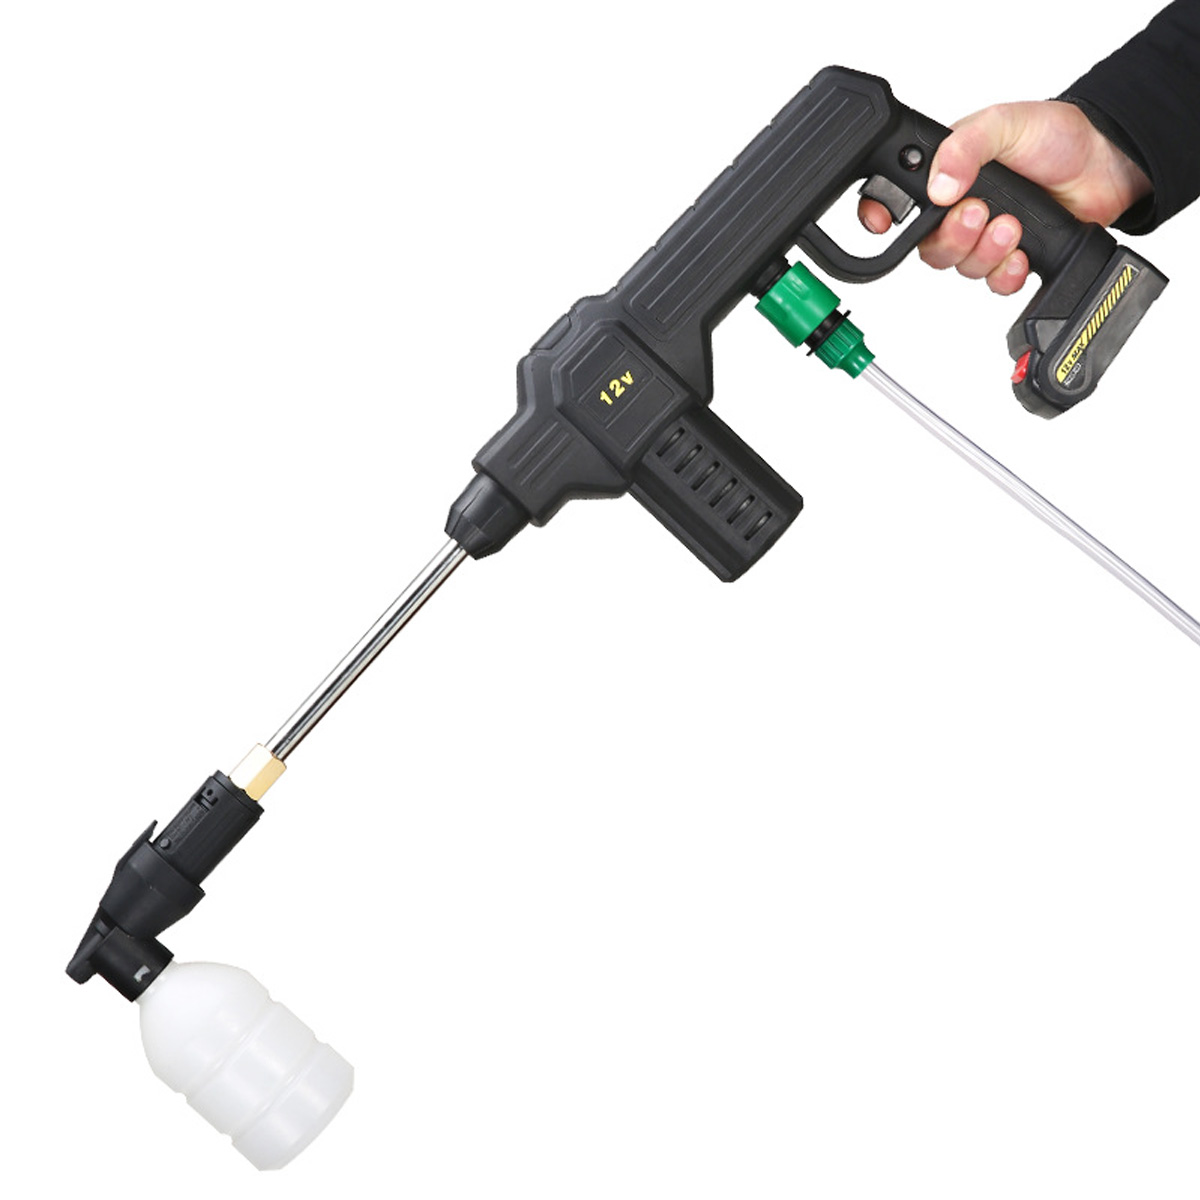 12V-High-Pressure-Cordless-Car-Washer-Washing-Spray-Guns-Water-Cleaner-With-12pcs-Battery-1827870-8